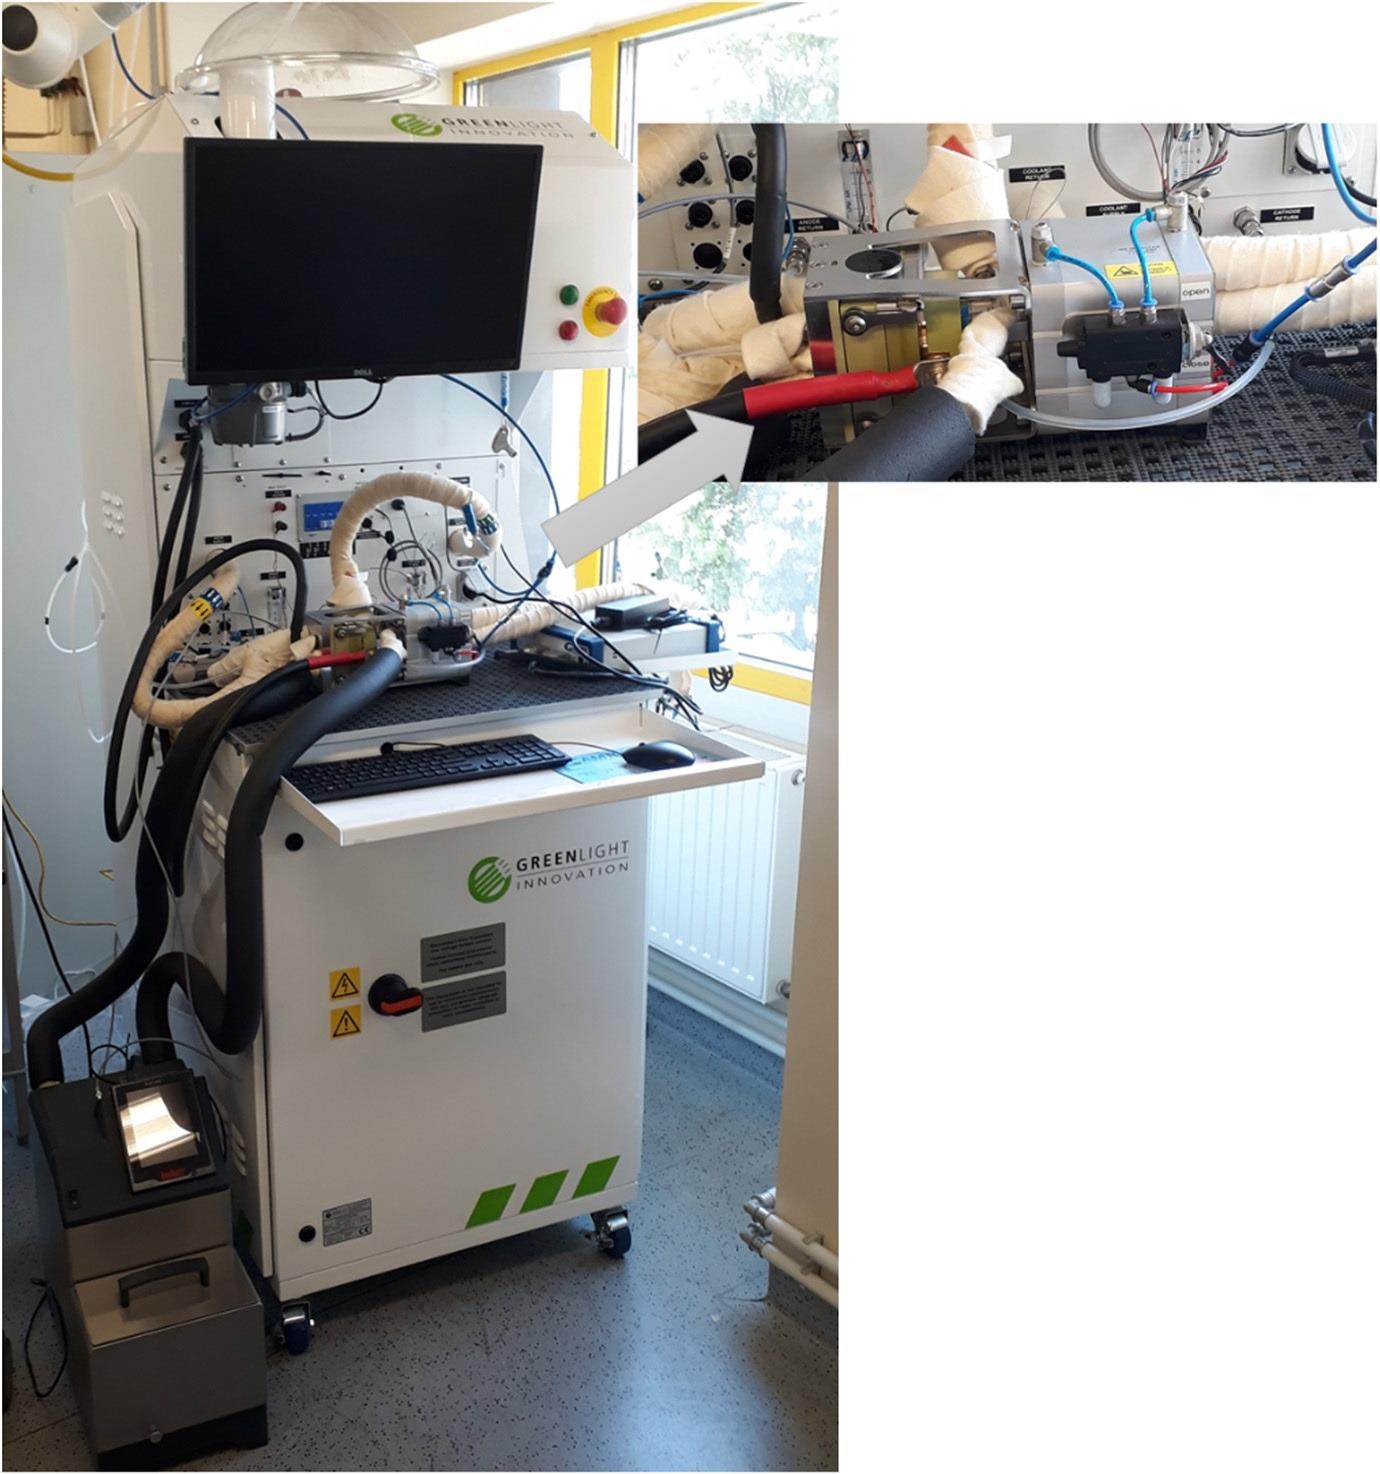 G60 test station (left) and zoom-in on the single cell compression unit (right).